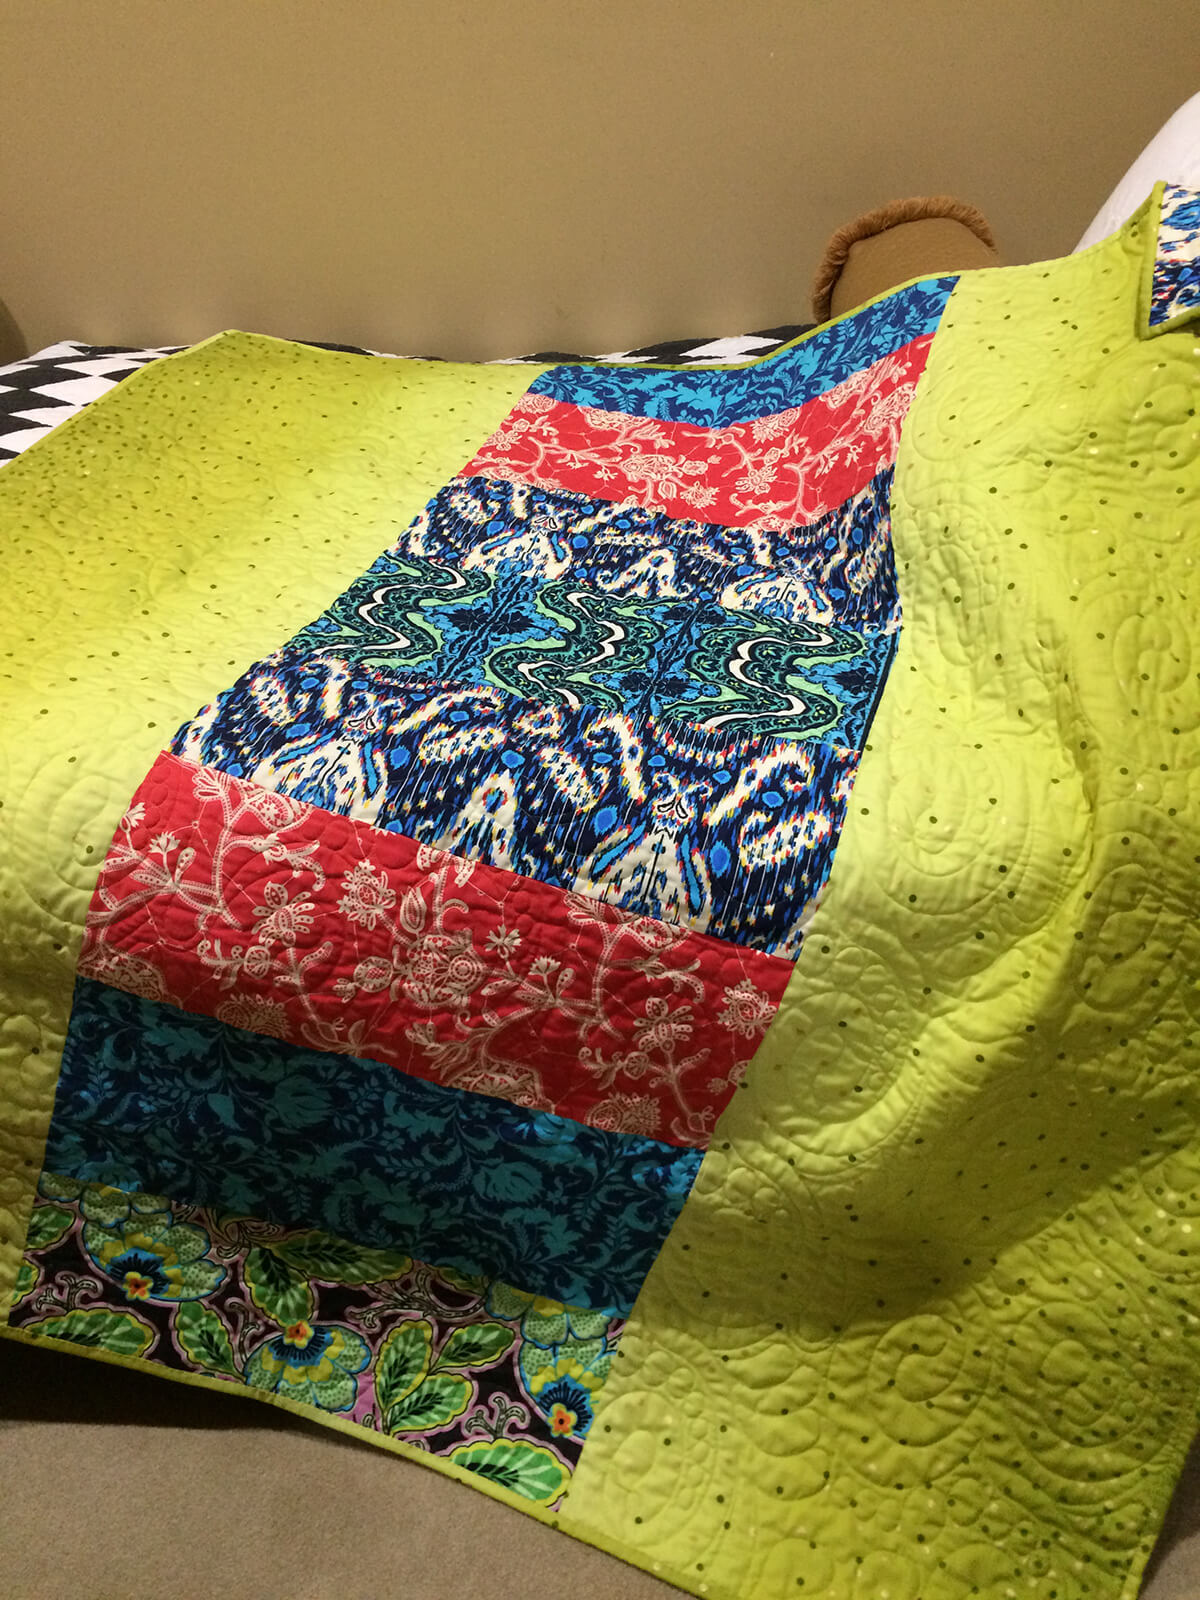 Back side of my quilt with Amy Butler fabrics